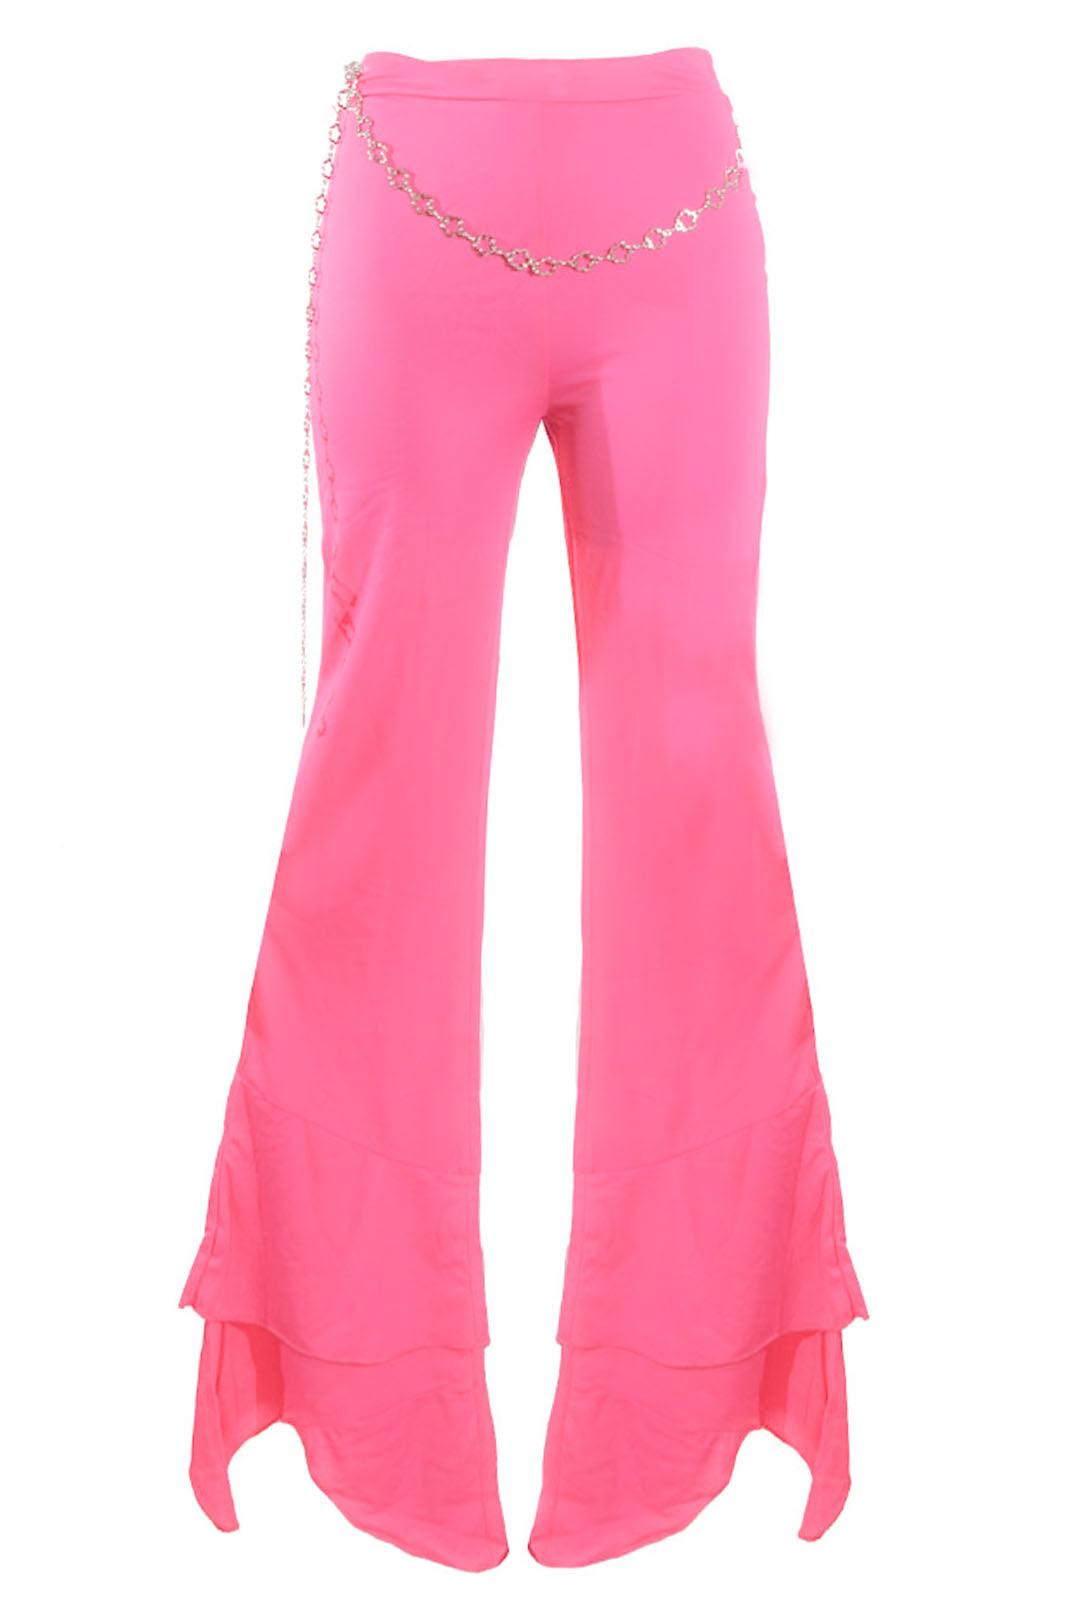 Ikon/Diva Y2k Fluted Flare Trouser in Hot Pink /w Belly Chain - Elsie & Fred